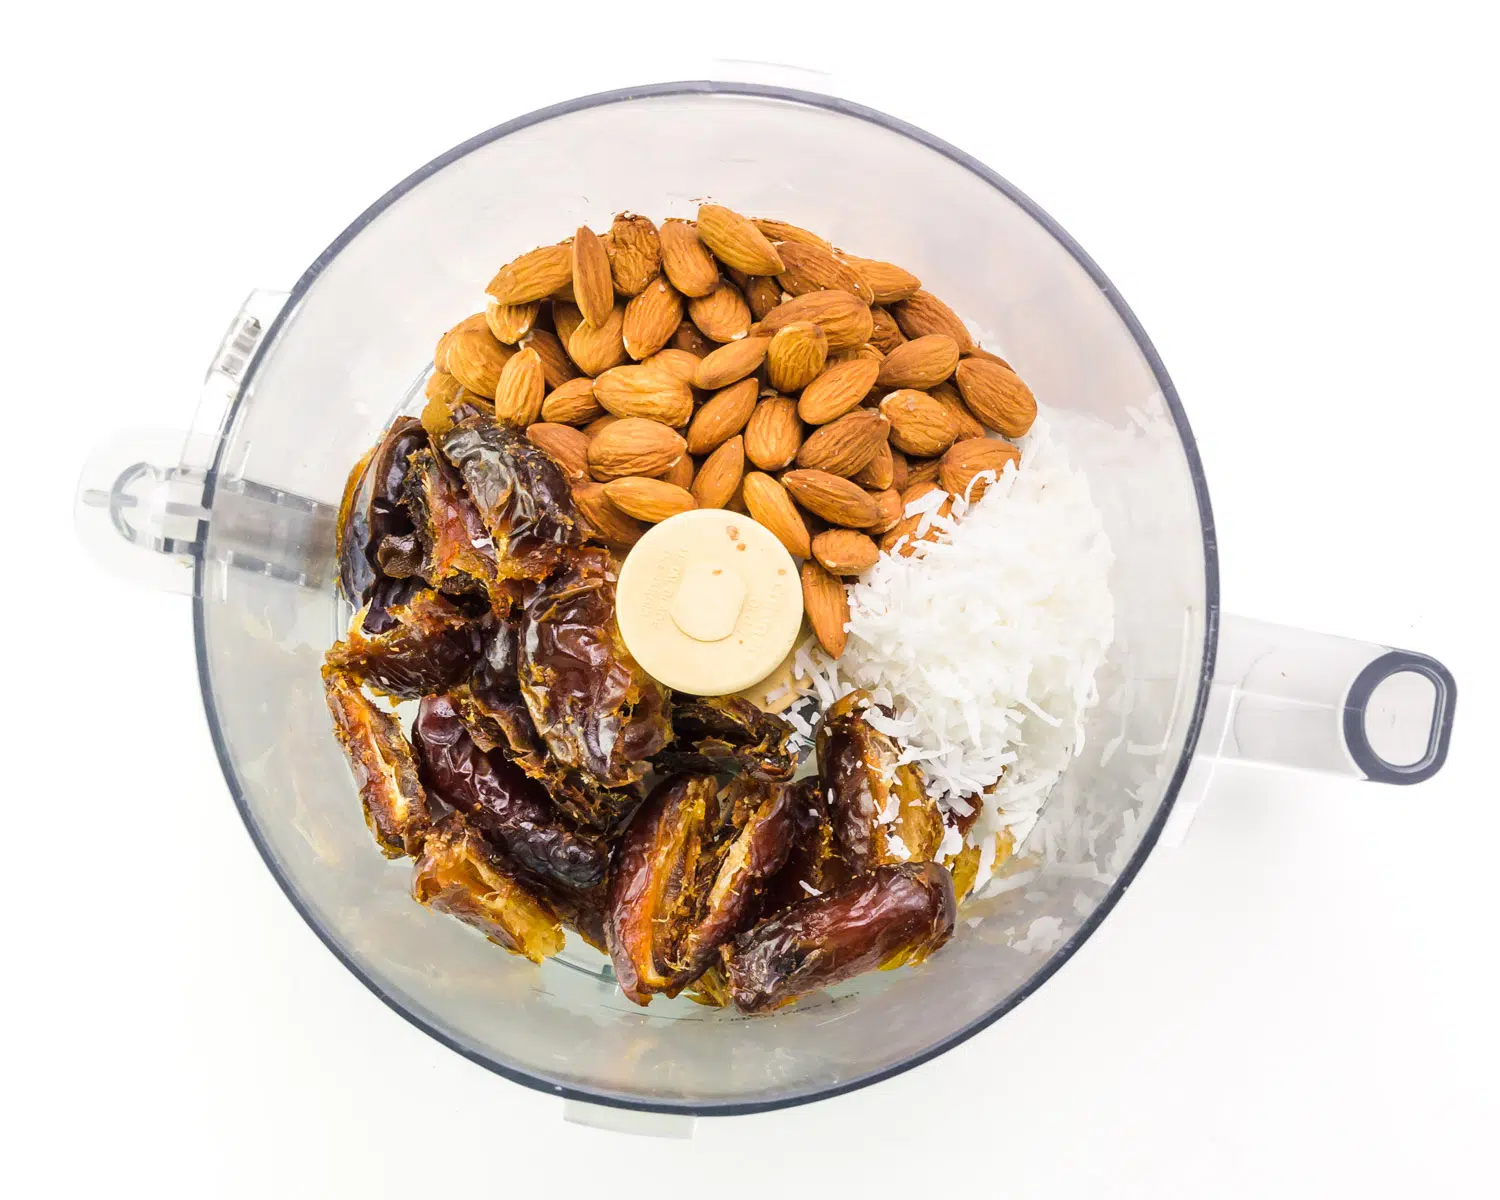 Looking down on a food processor with raw almonds, dates, and coconut flakes.